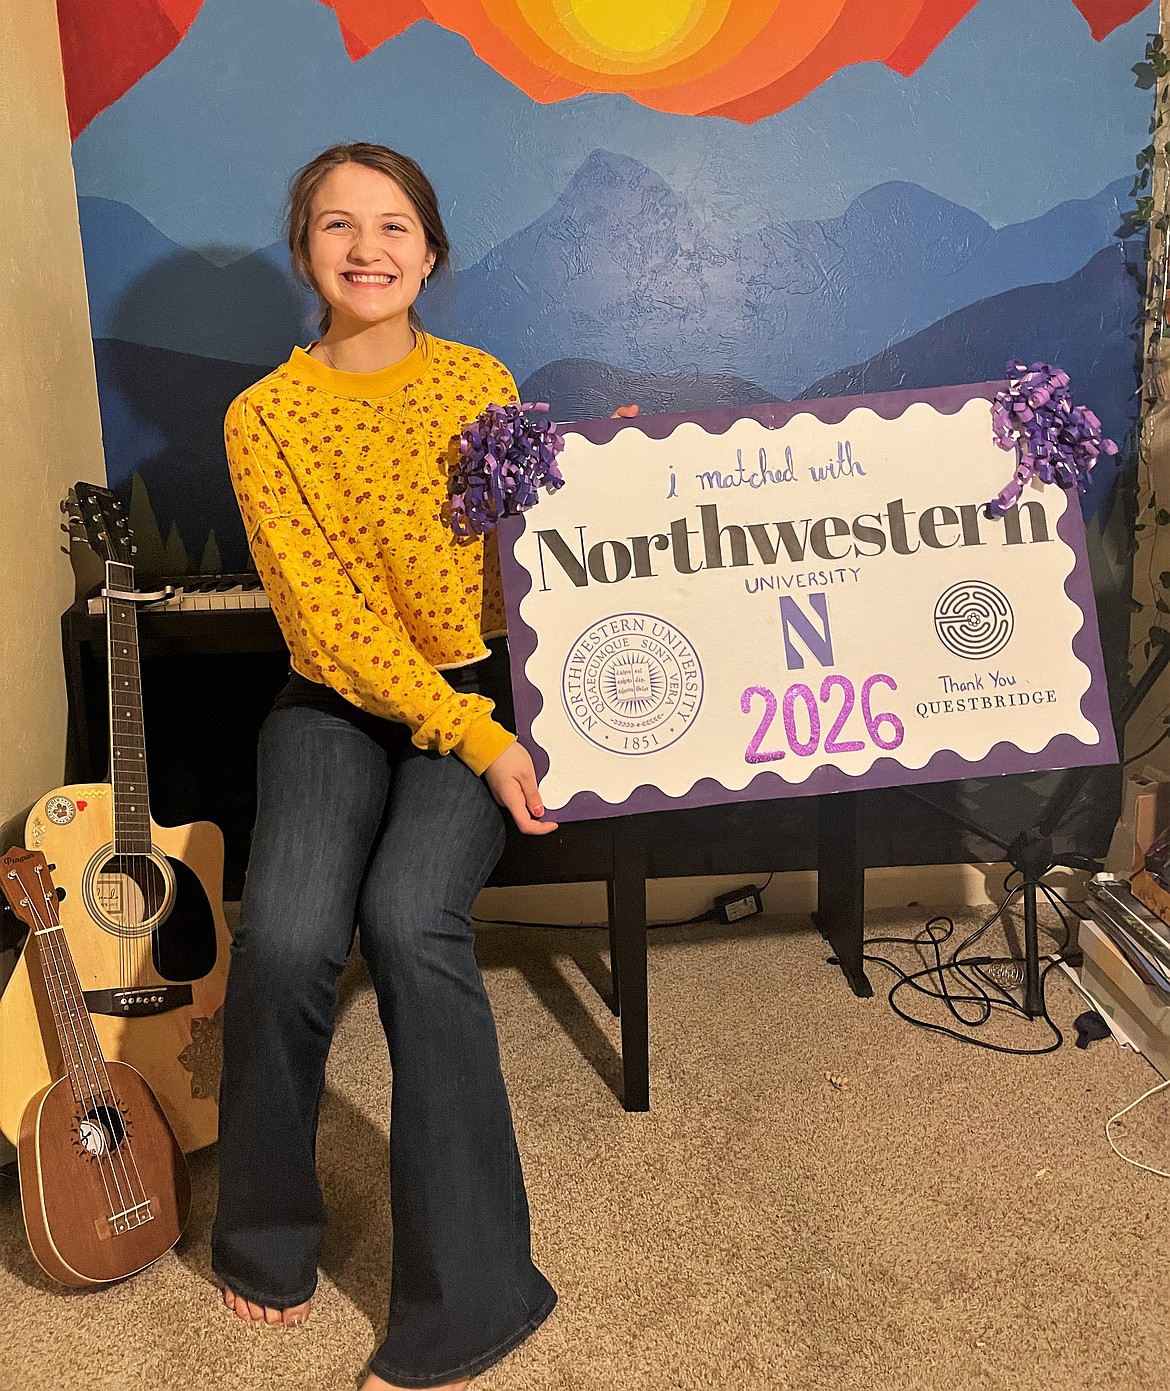 Brookelyn Slonaker recently accepted a full tuition scholarship to Northwestern University in Chicago, where she plans to study speech pathology. (Courtesy photo)